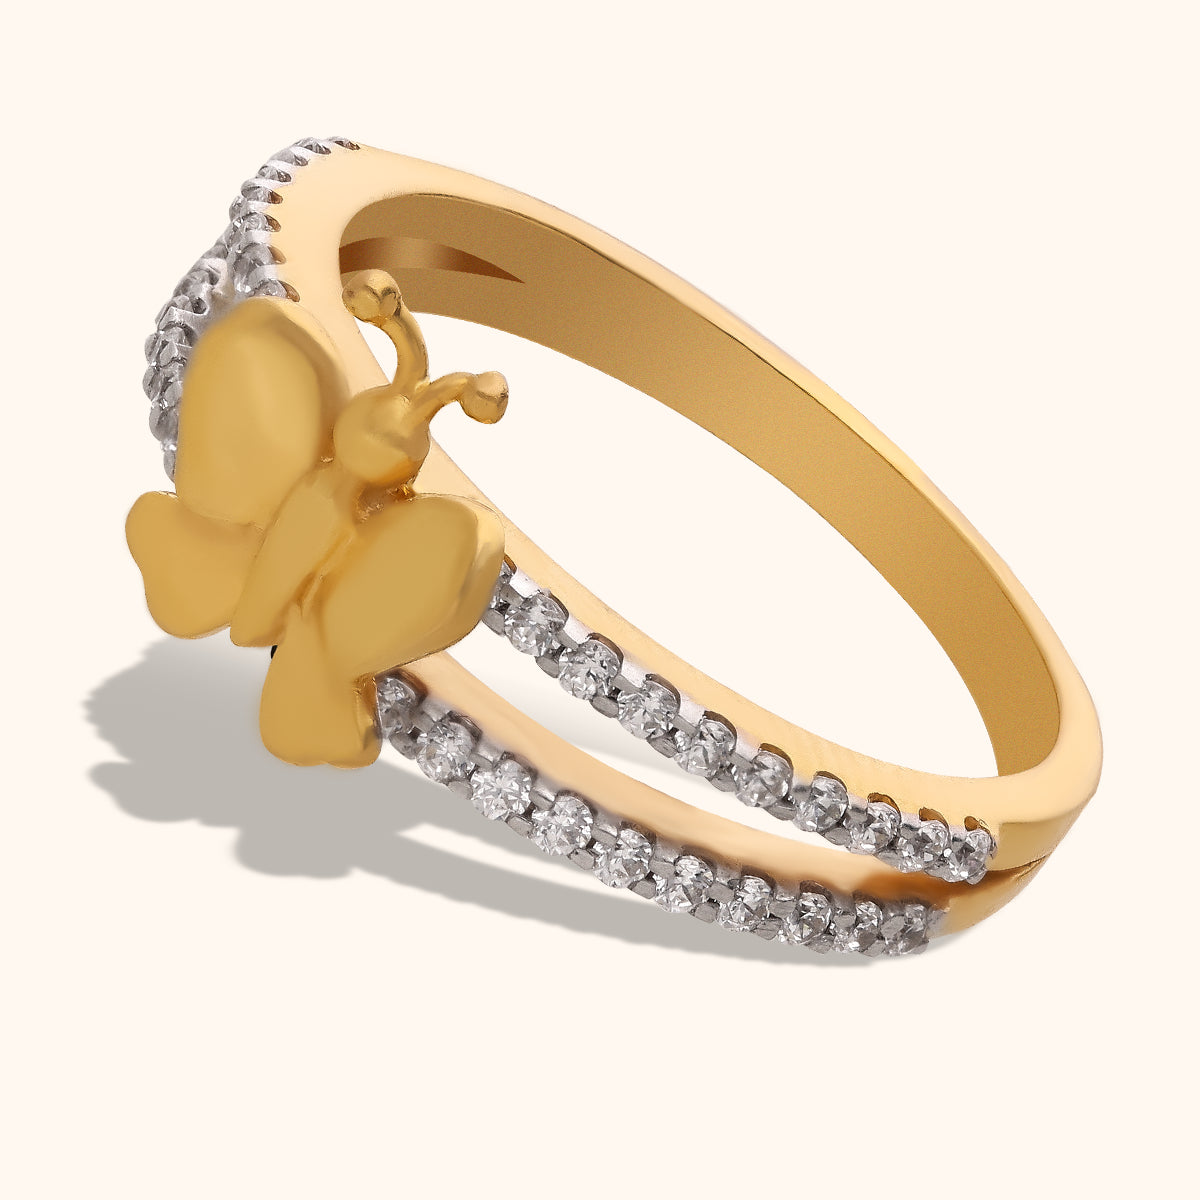 Buy quality 916 Gold Gorgeous Ring in Ahmedabad